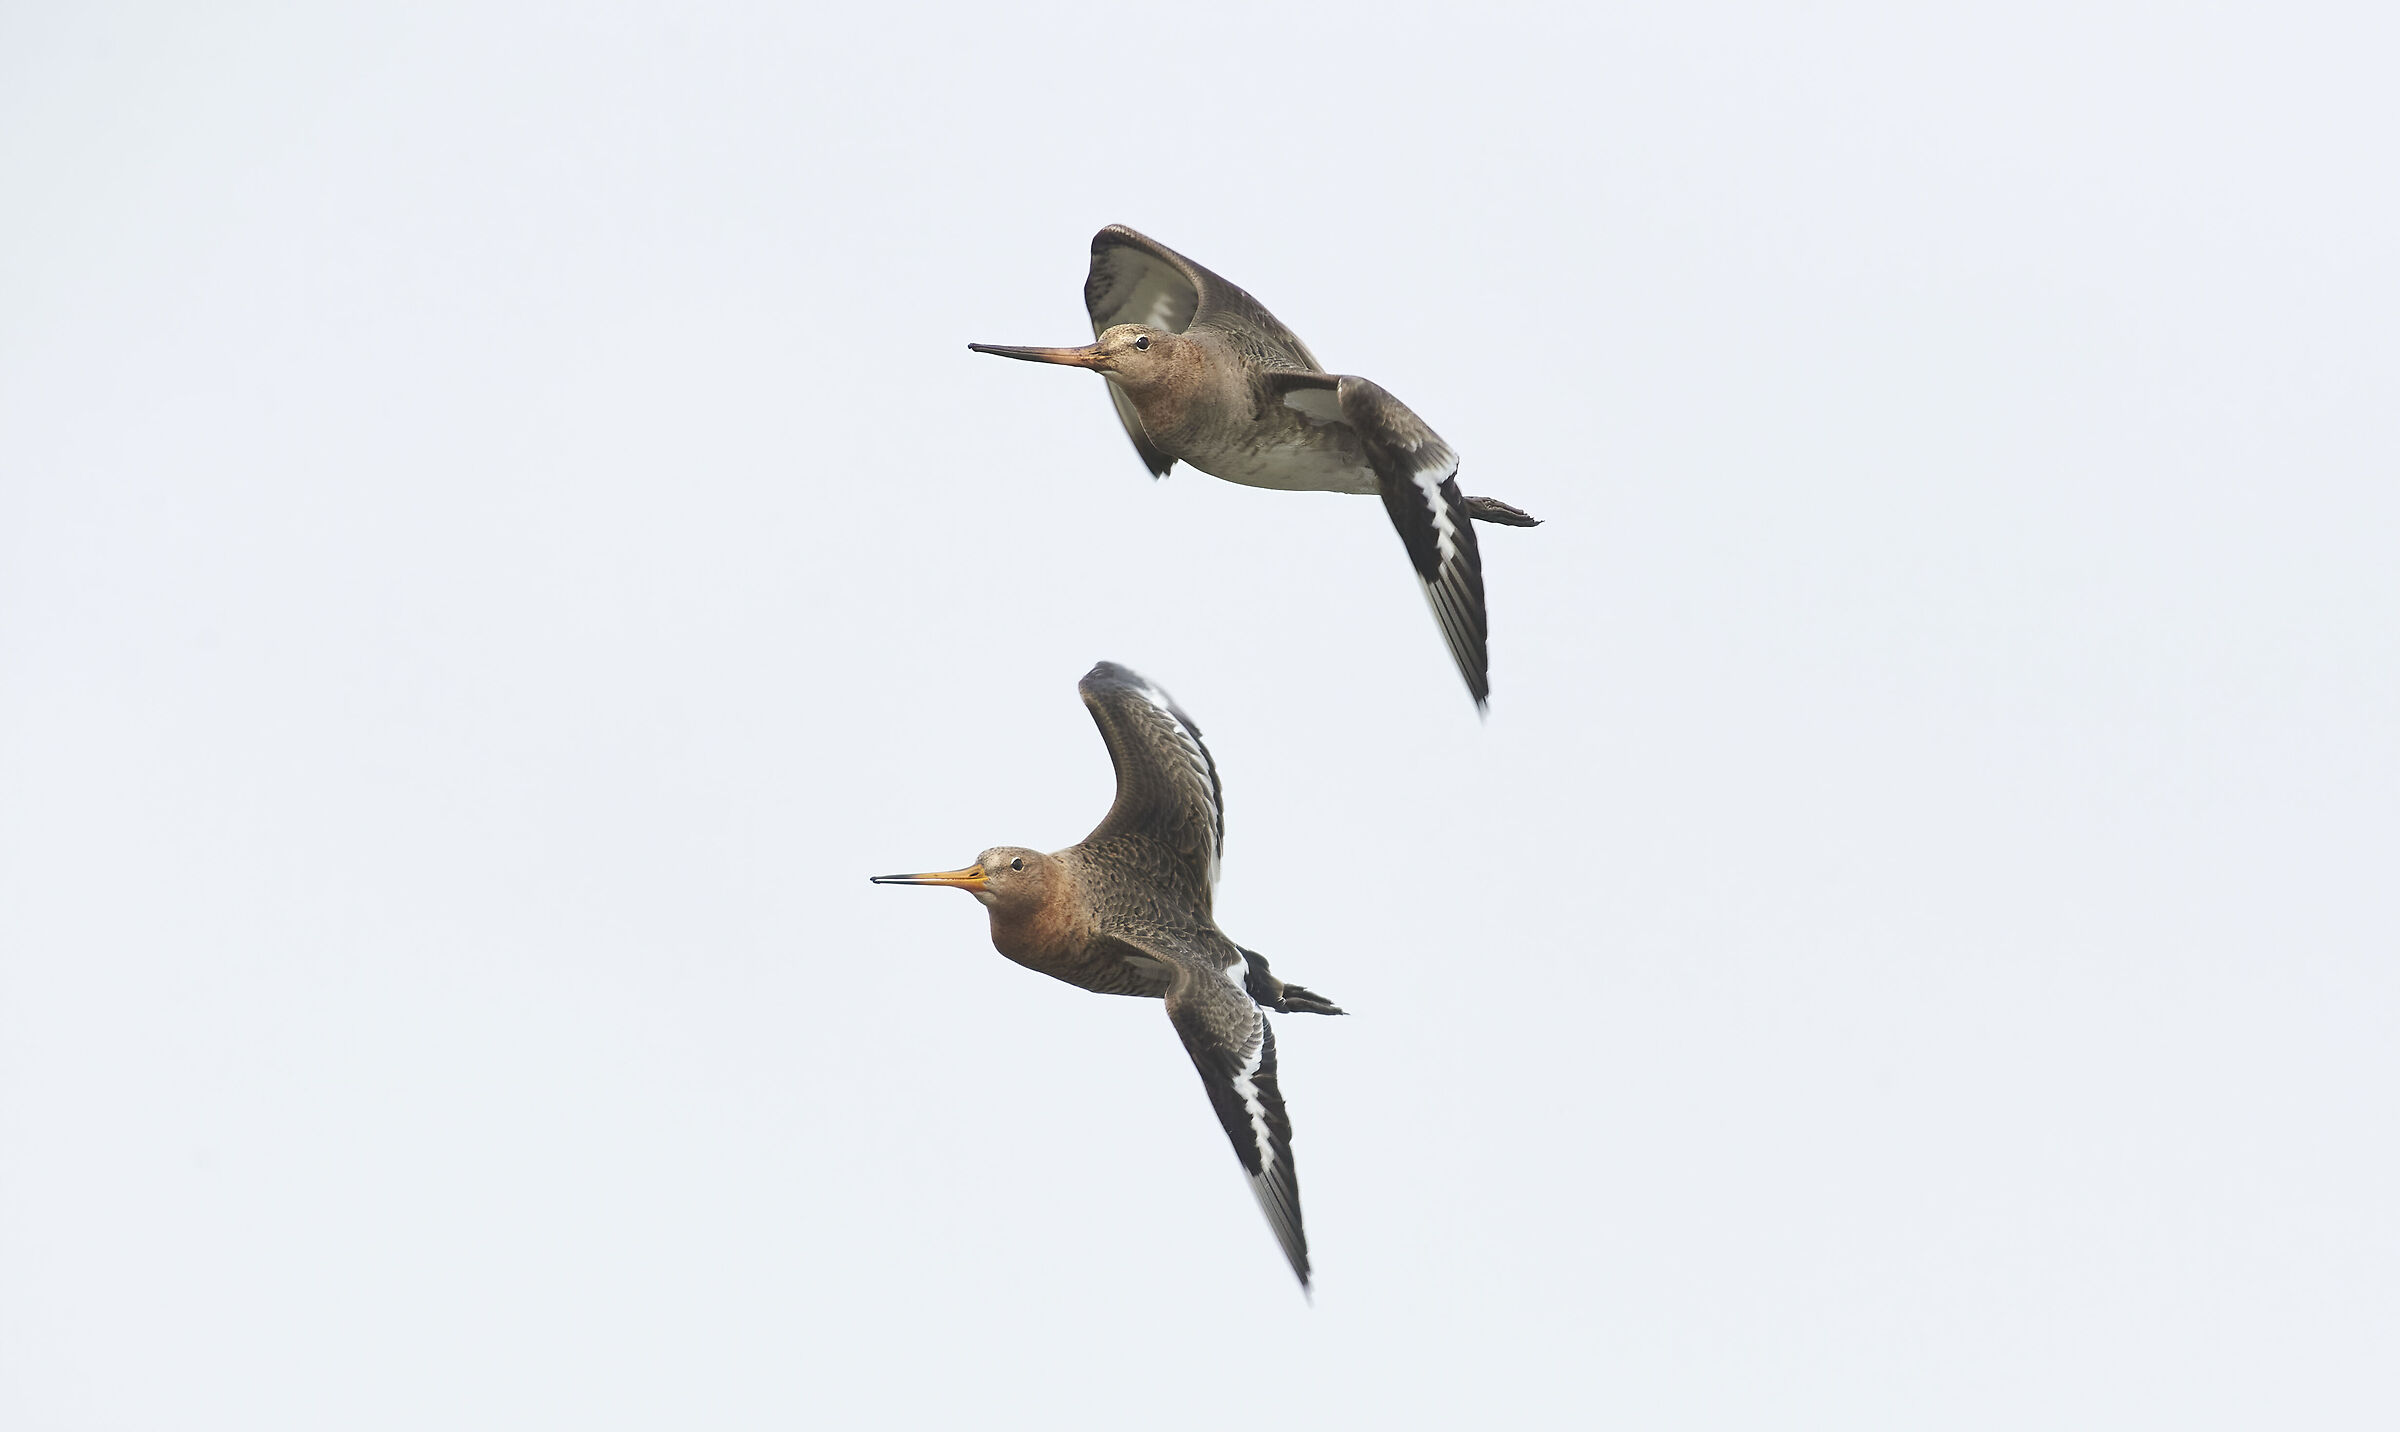 Blacktailed Godwits on a cloudy day...